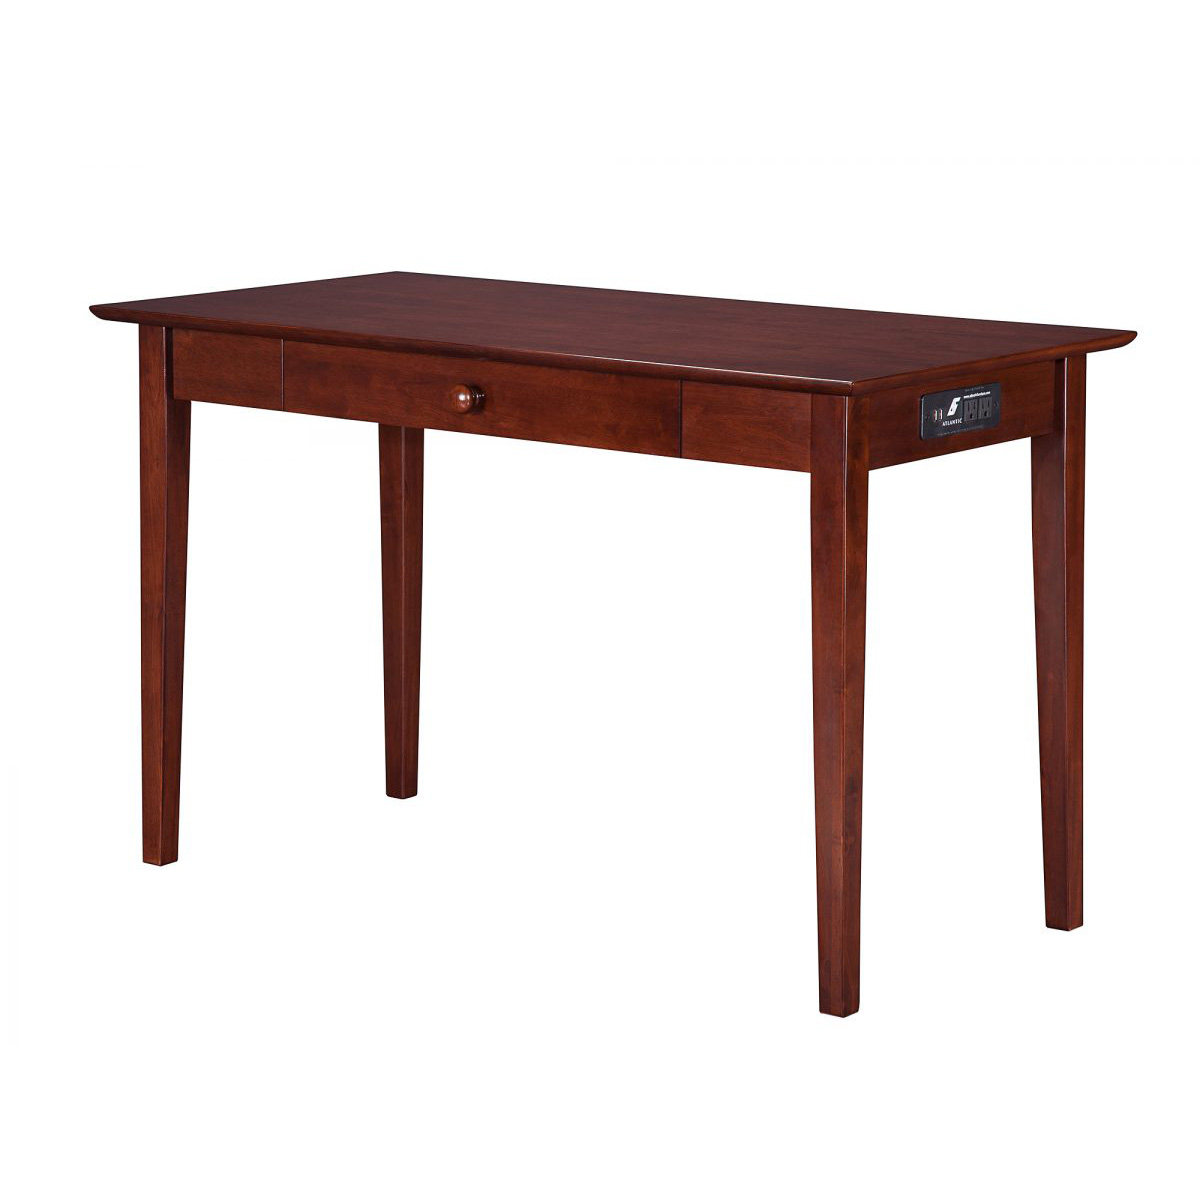 Atlantic Furniture Shaker Desk with Drawer and Charging Station